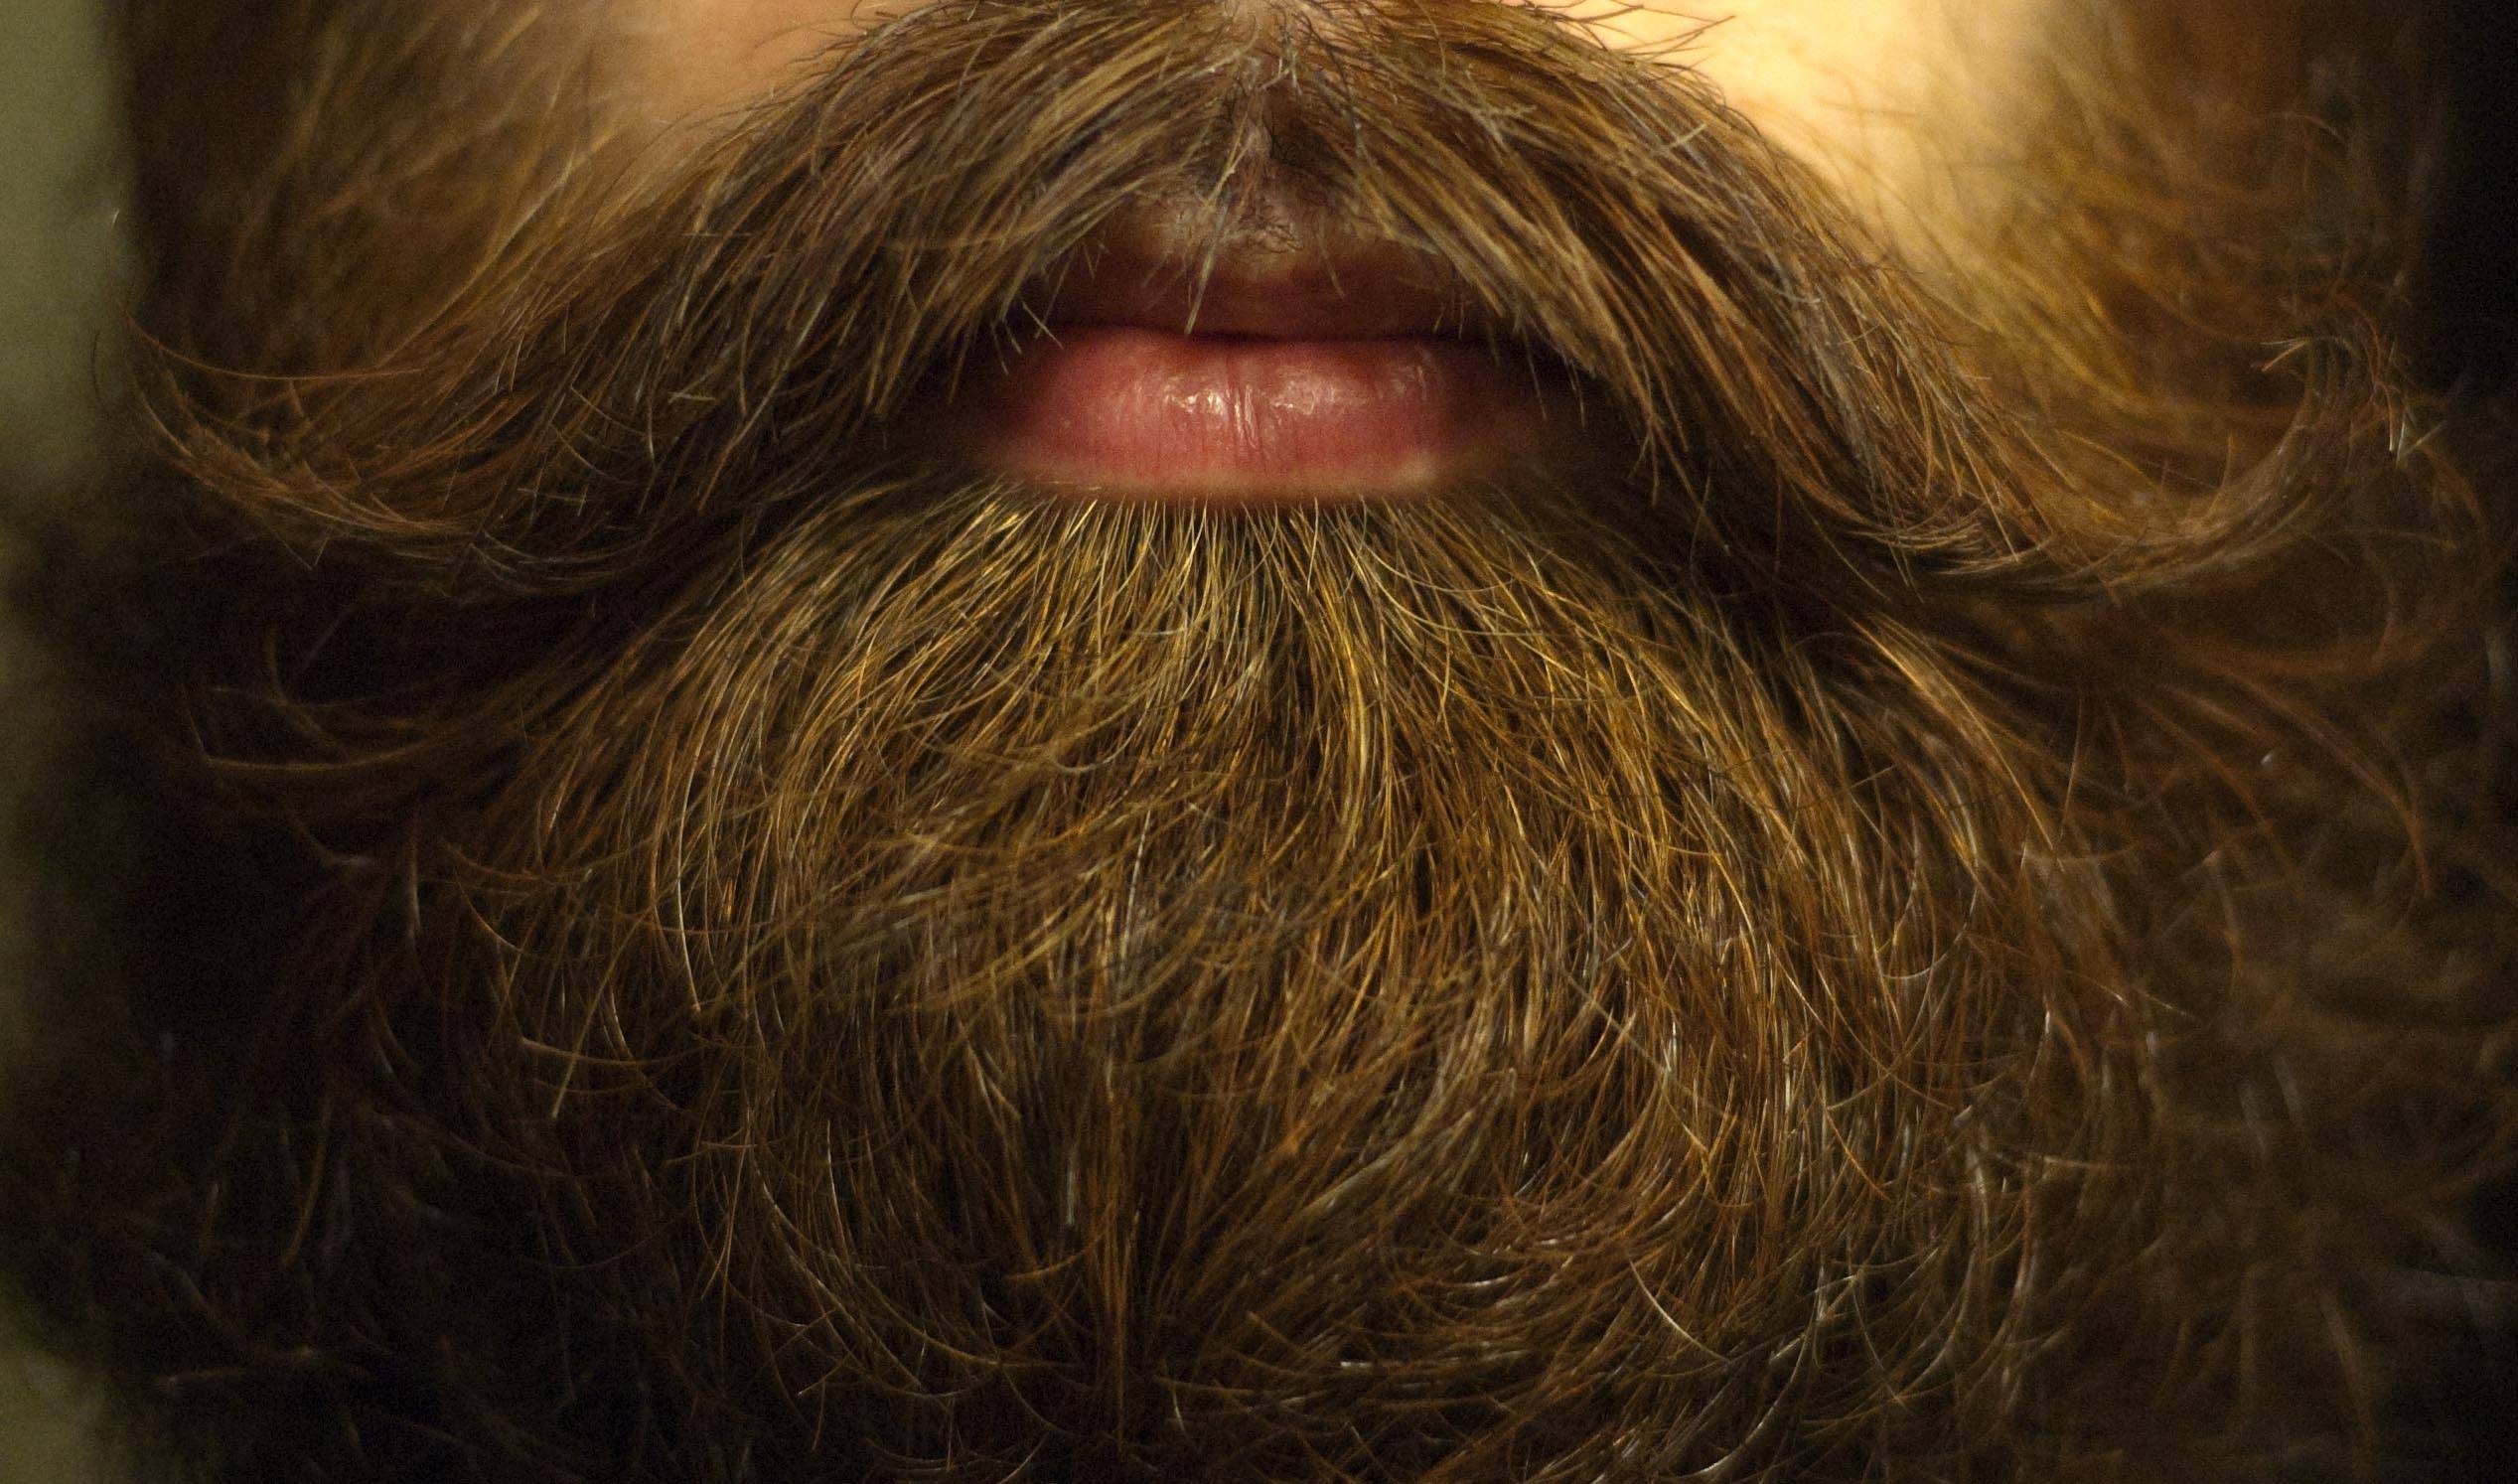 Tips for Starting and Cultivating Your Best Beard